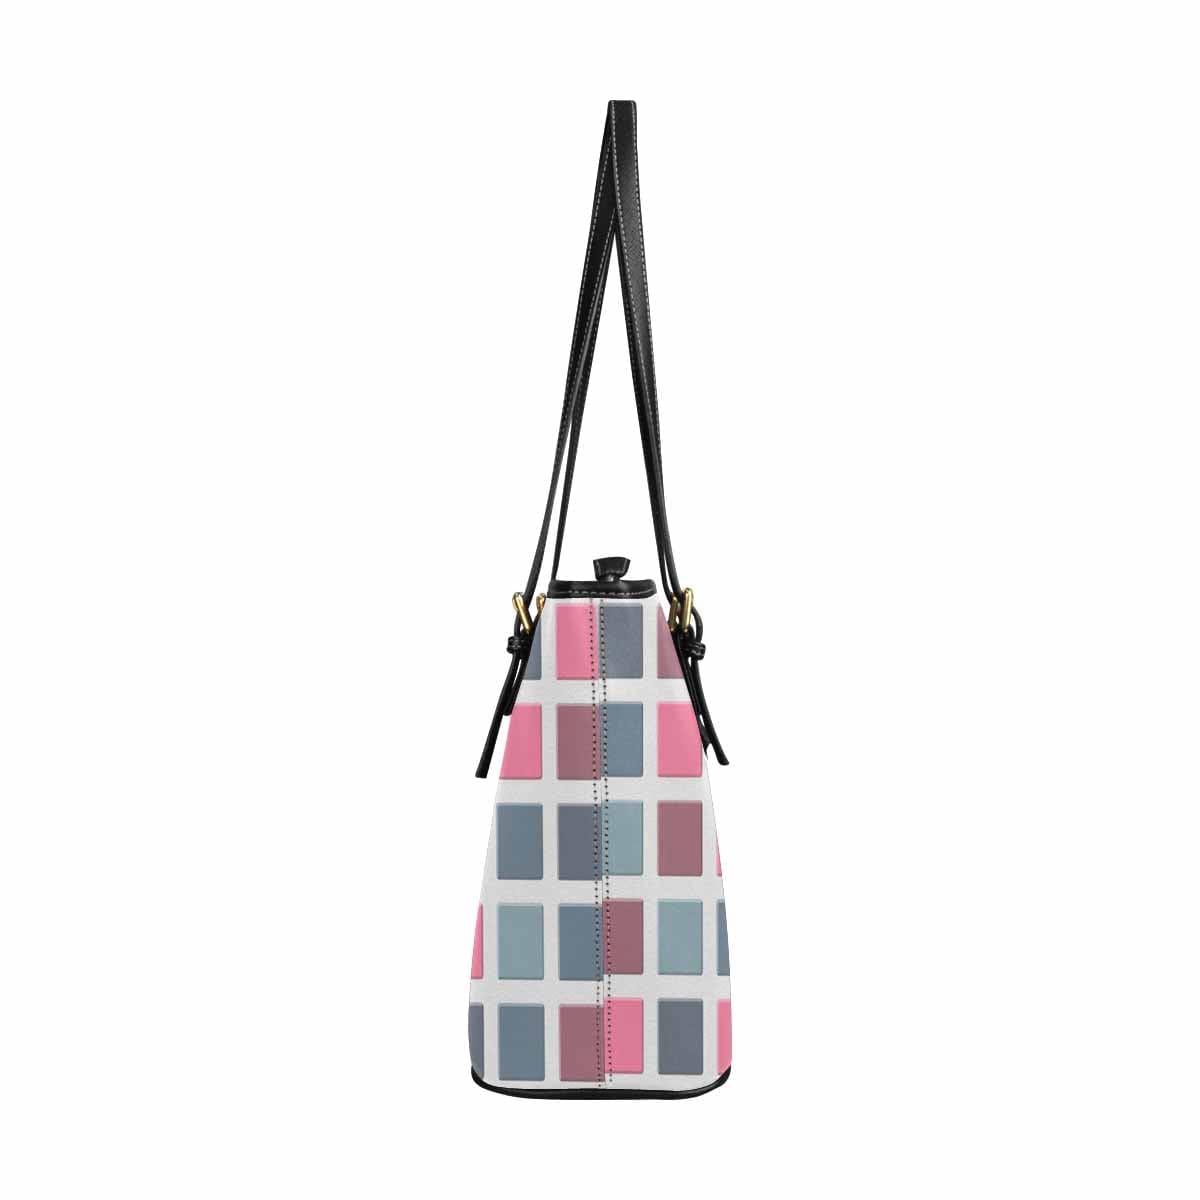 Large Leather Tote Shoulder Bag - Mosaic Tiles Pink Grey - Bags | Leather Tote